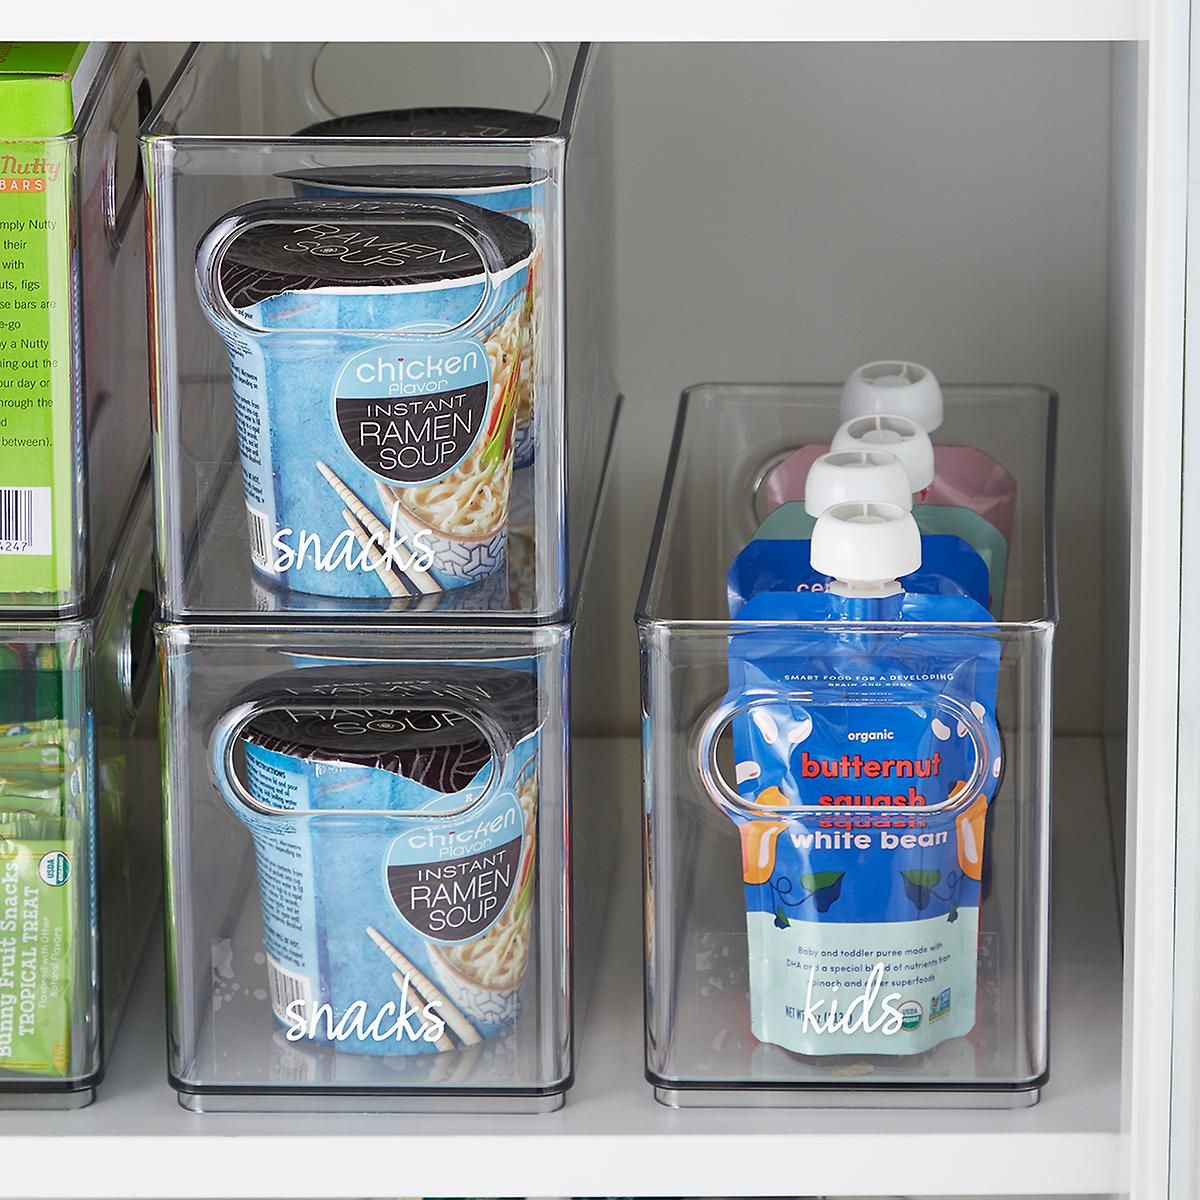 The Home Edit by iDesign Narrow Pantry Bin | The Container Store